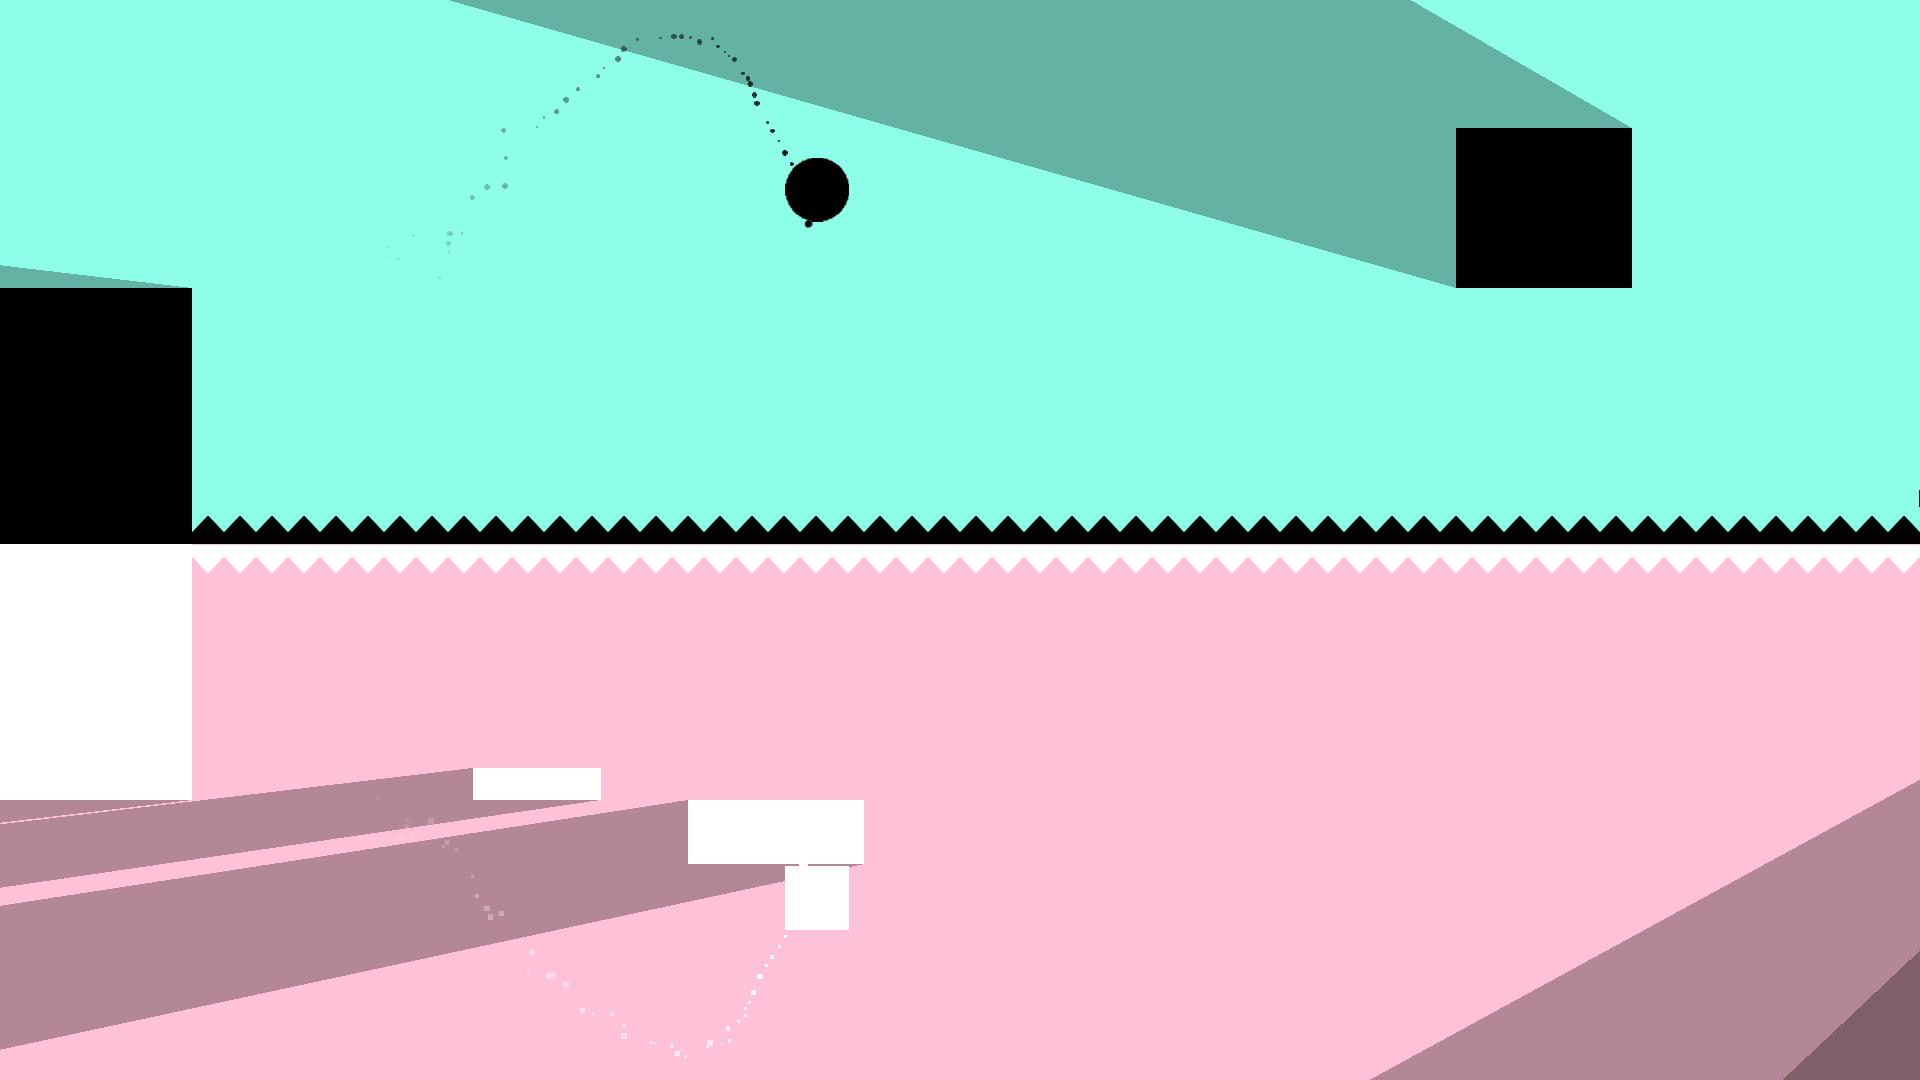 Screenshot №3 from game Through the Mirror